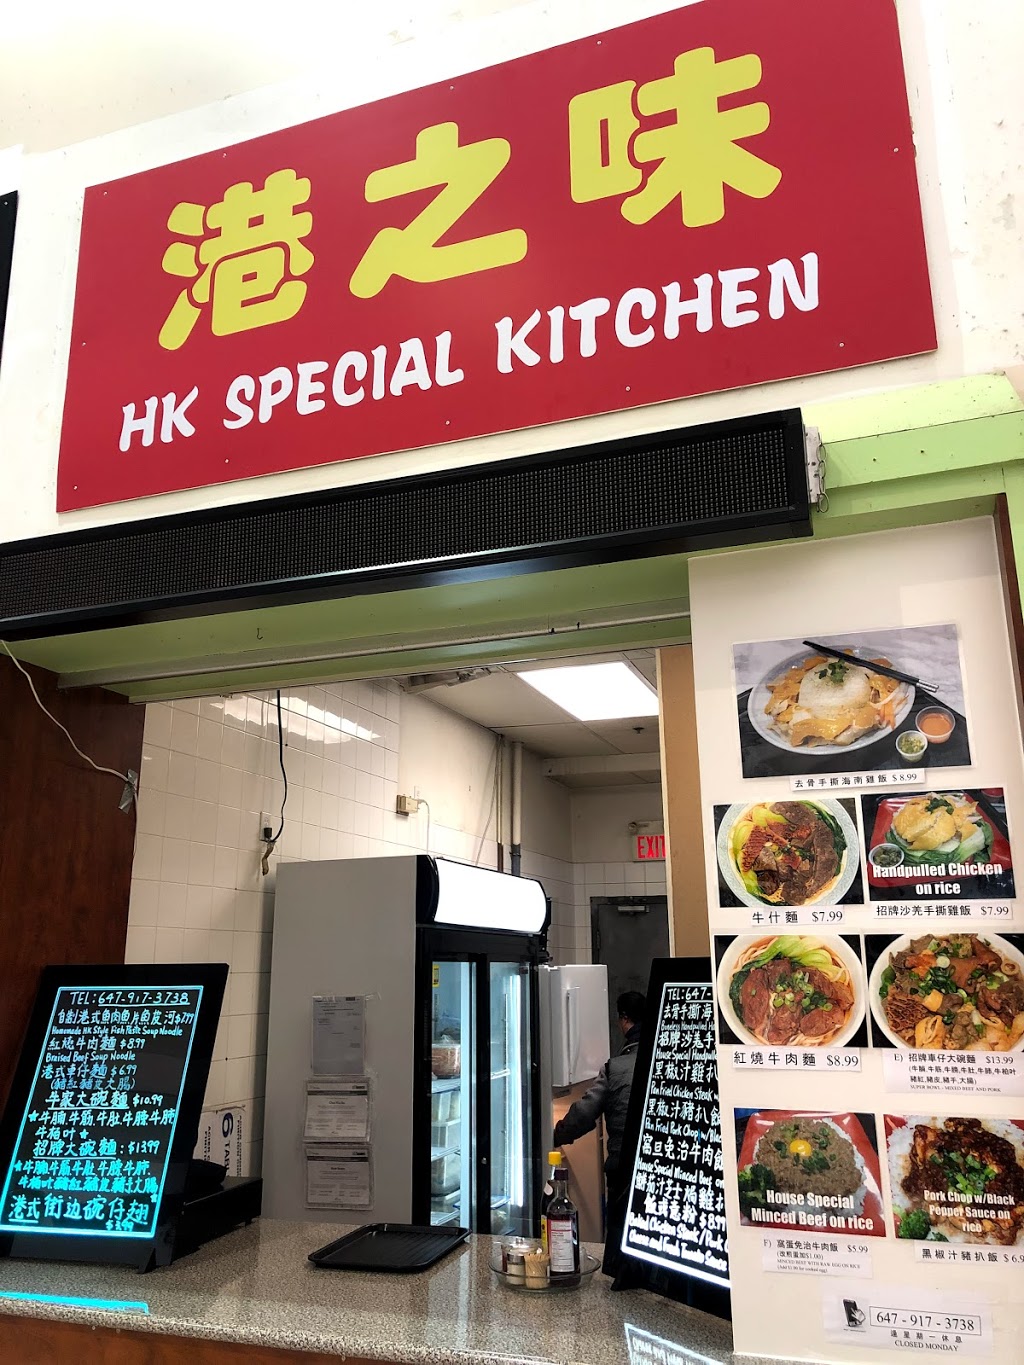 HK Special Kitchen | Agincourt, Toronto, ON M1S 2C8, Canada | Phone: (647) 917-3738